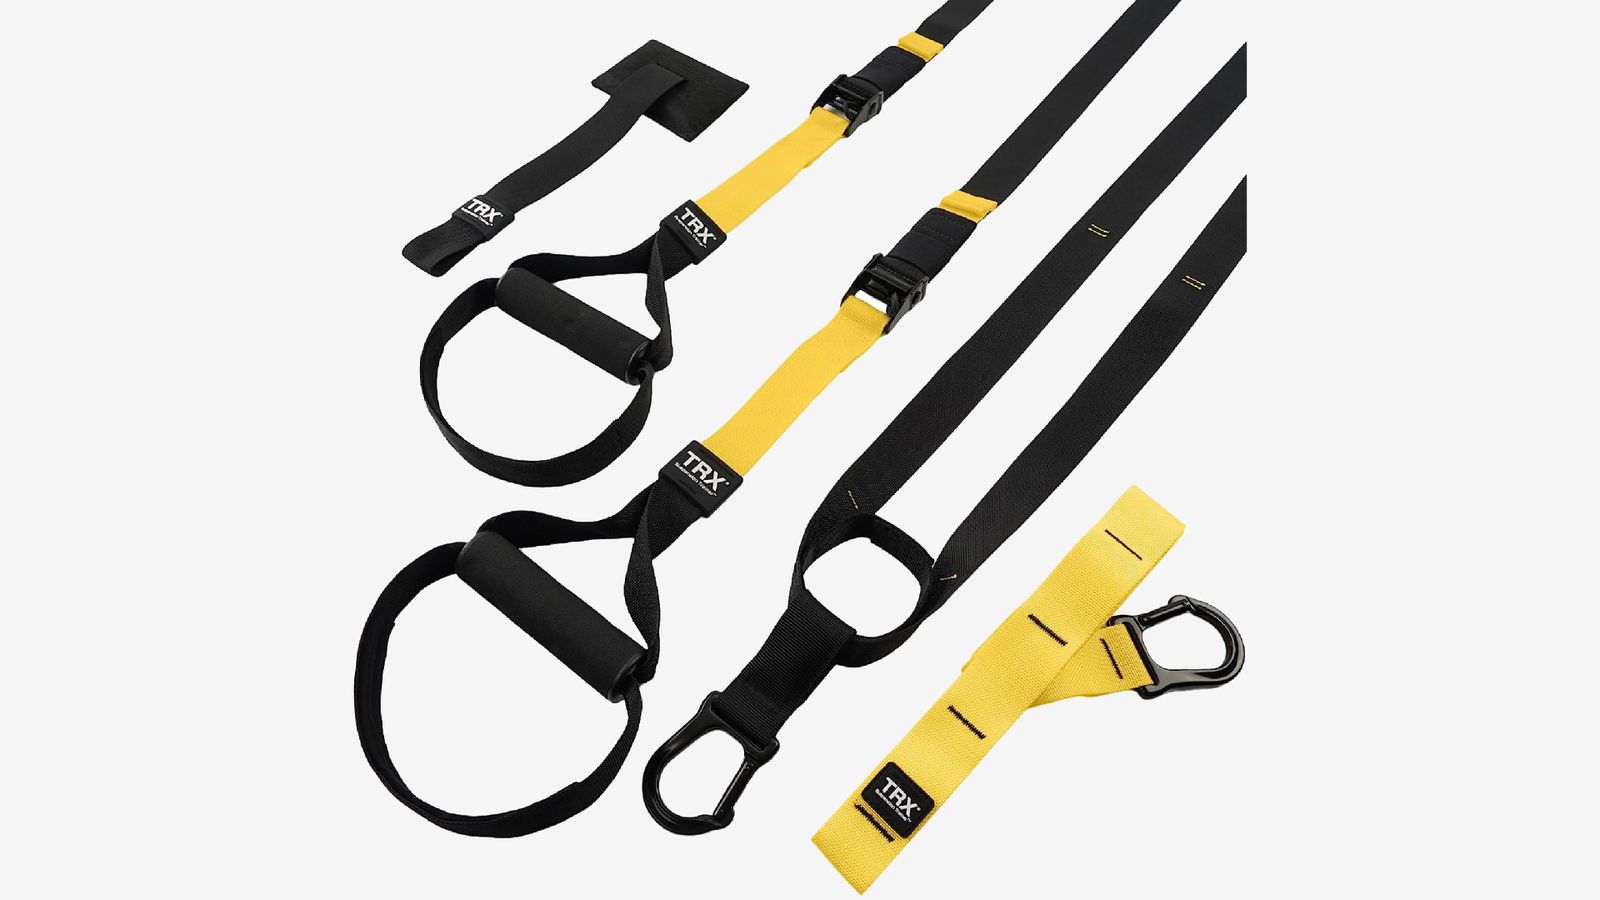 TRX All-In-One Suspension Training System product image of a selection of black and yellow cables.